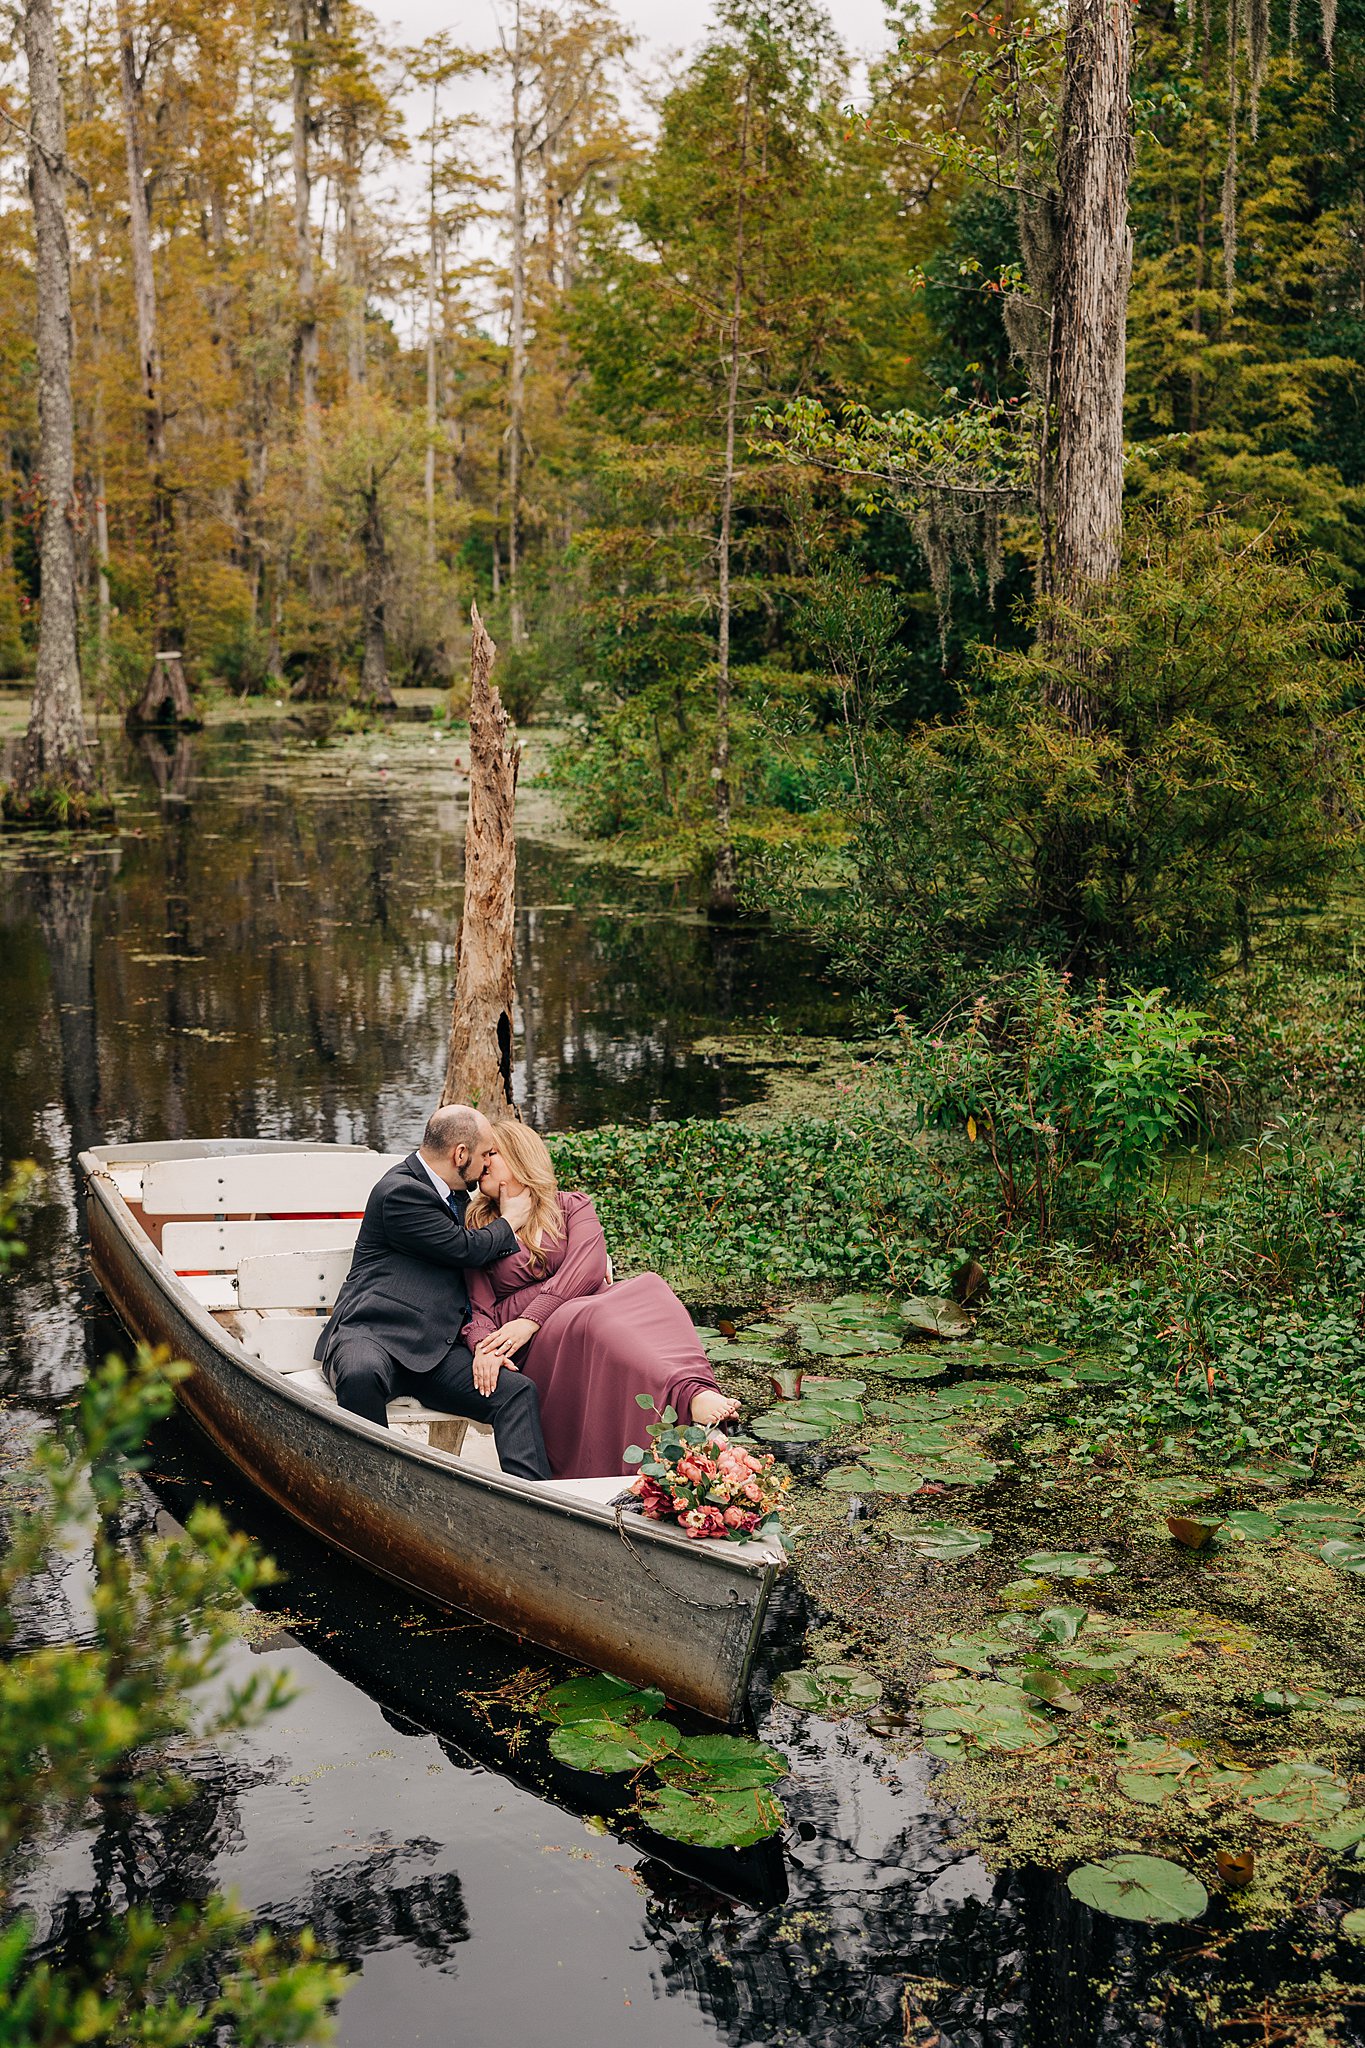 A couple in a small metal boat kiss while floating through the cypress swamp